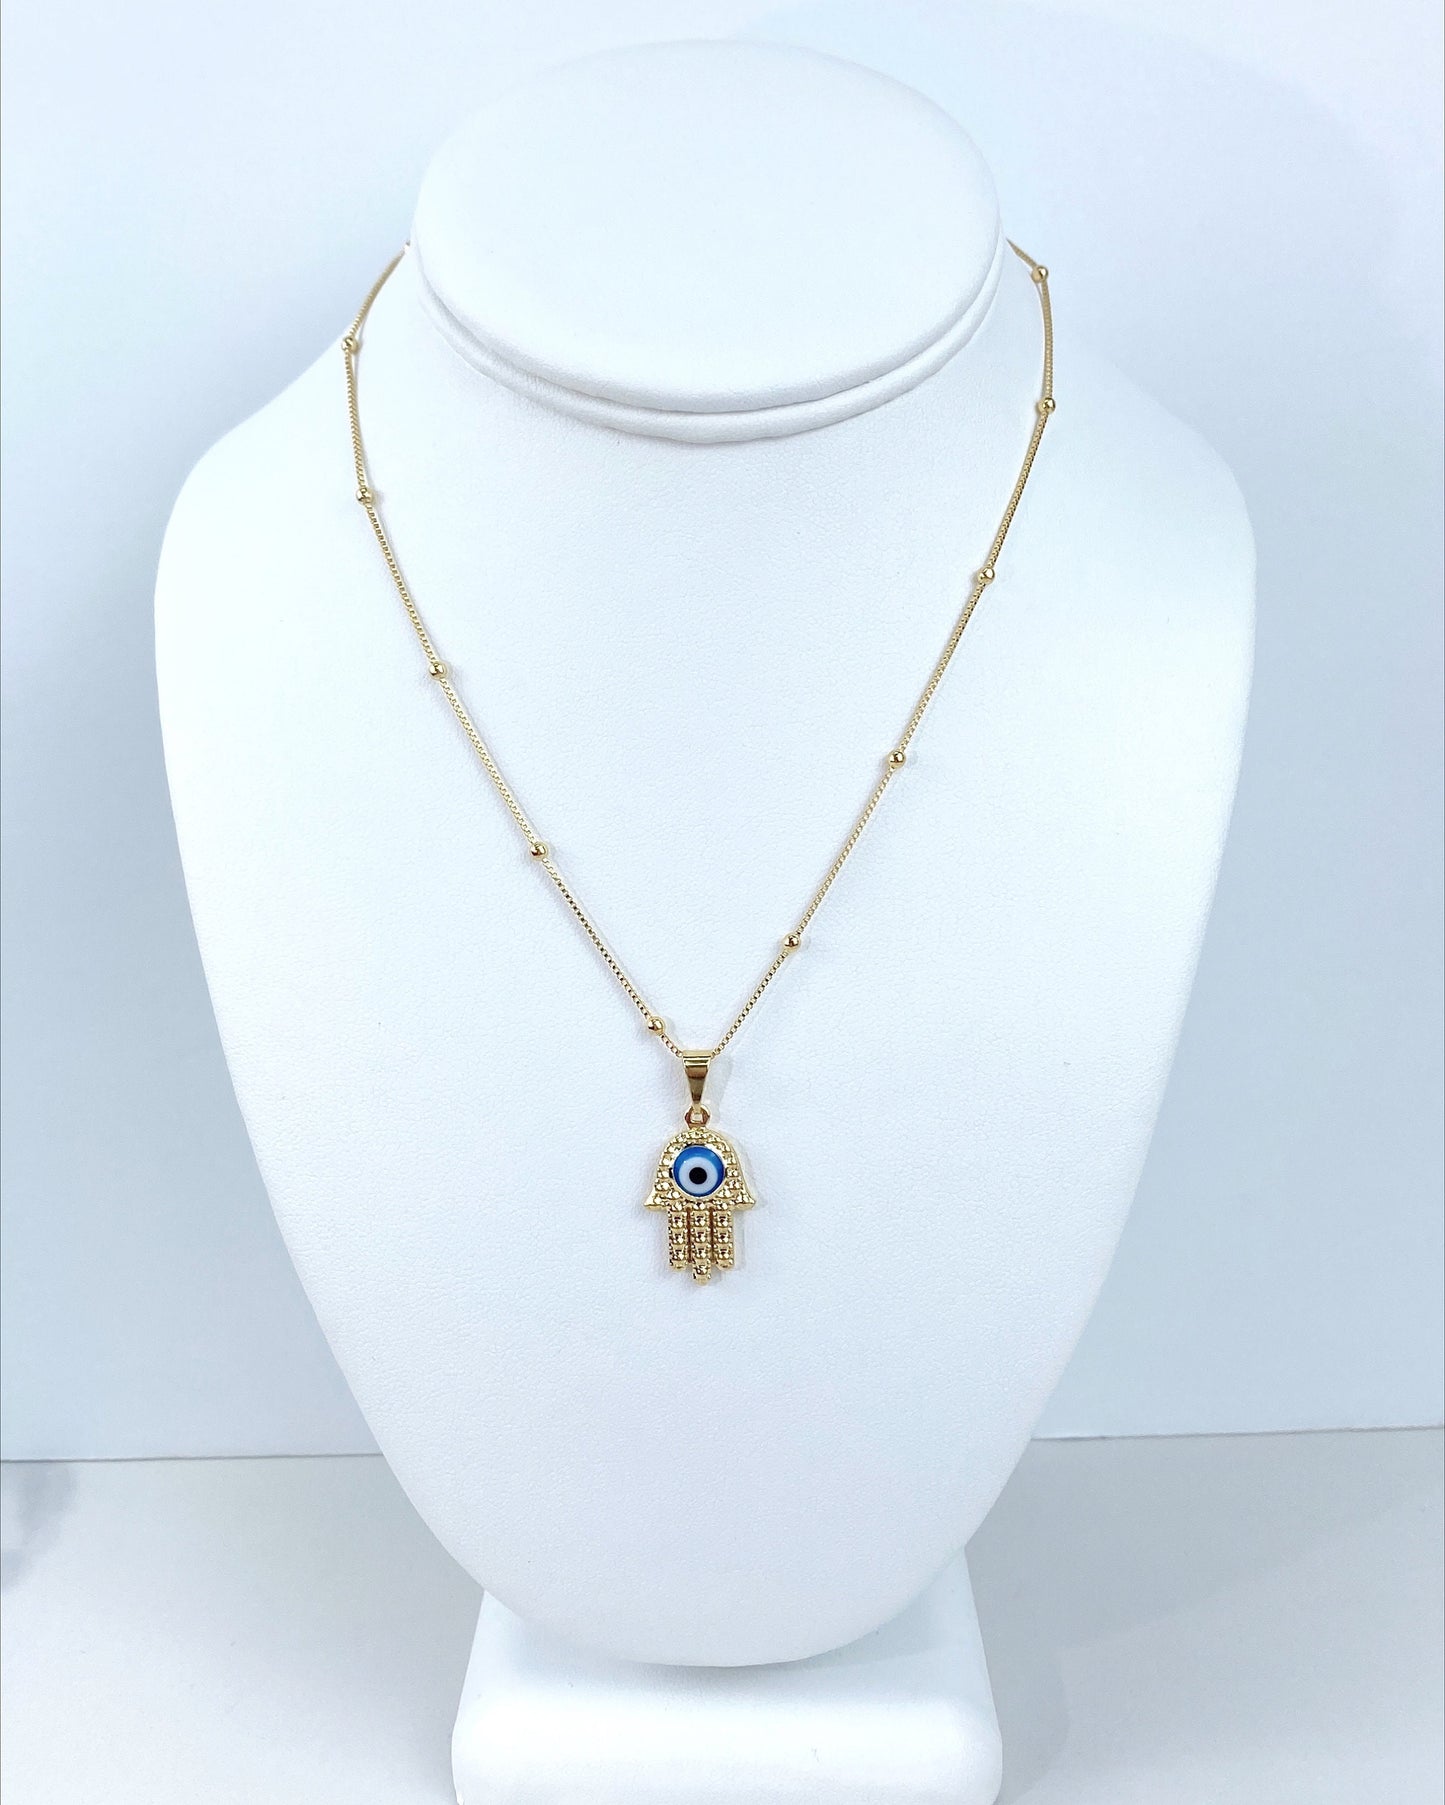 18k Gold Filled Hamsa Pendant Necklace Featuring Center Blue Evil Eye Wholesale Jewelry Supplies